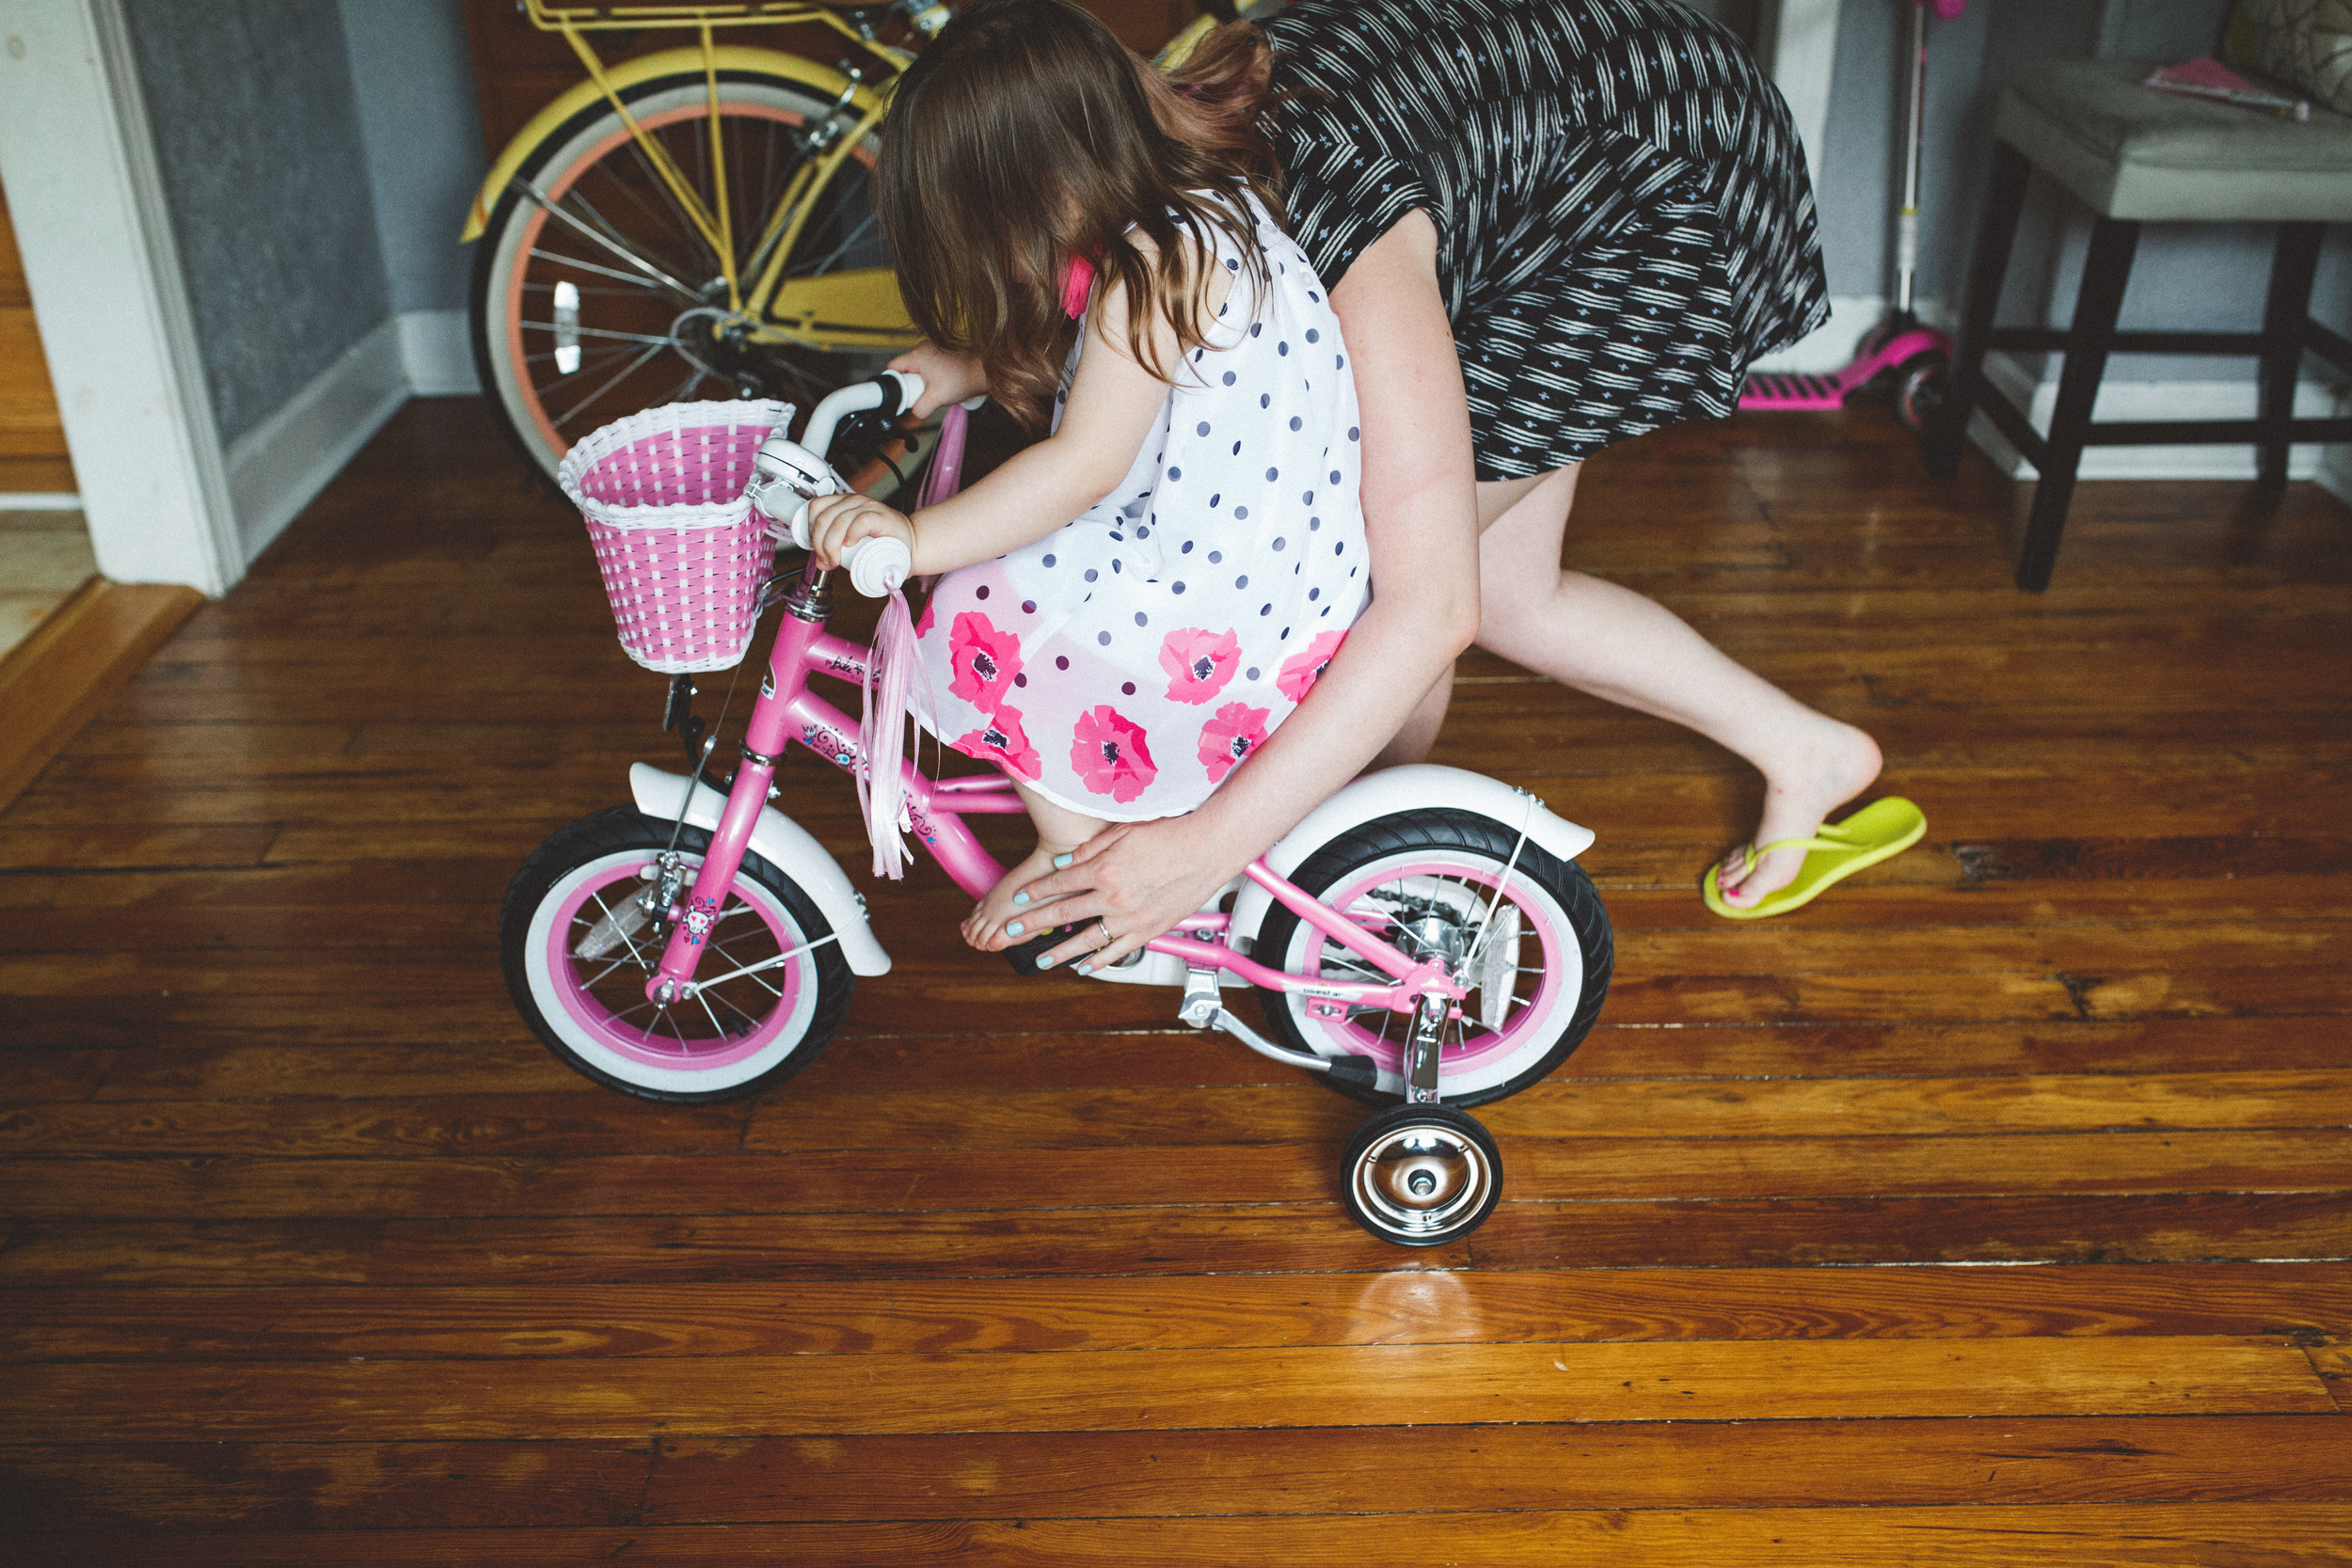 Mom helping daughter learn to ride bike.